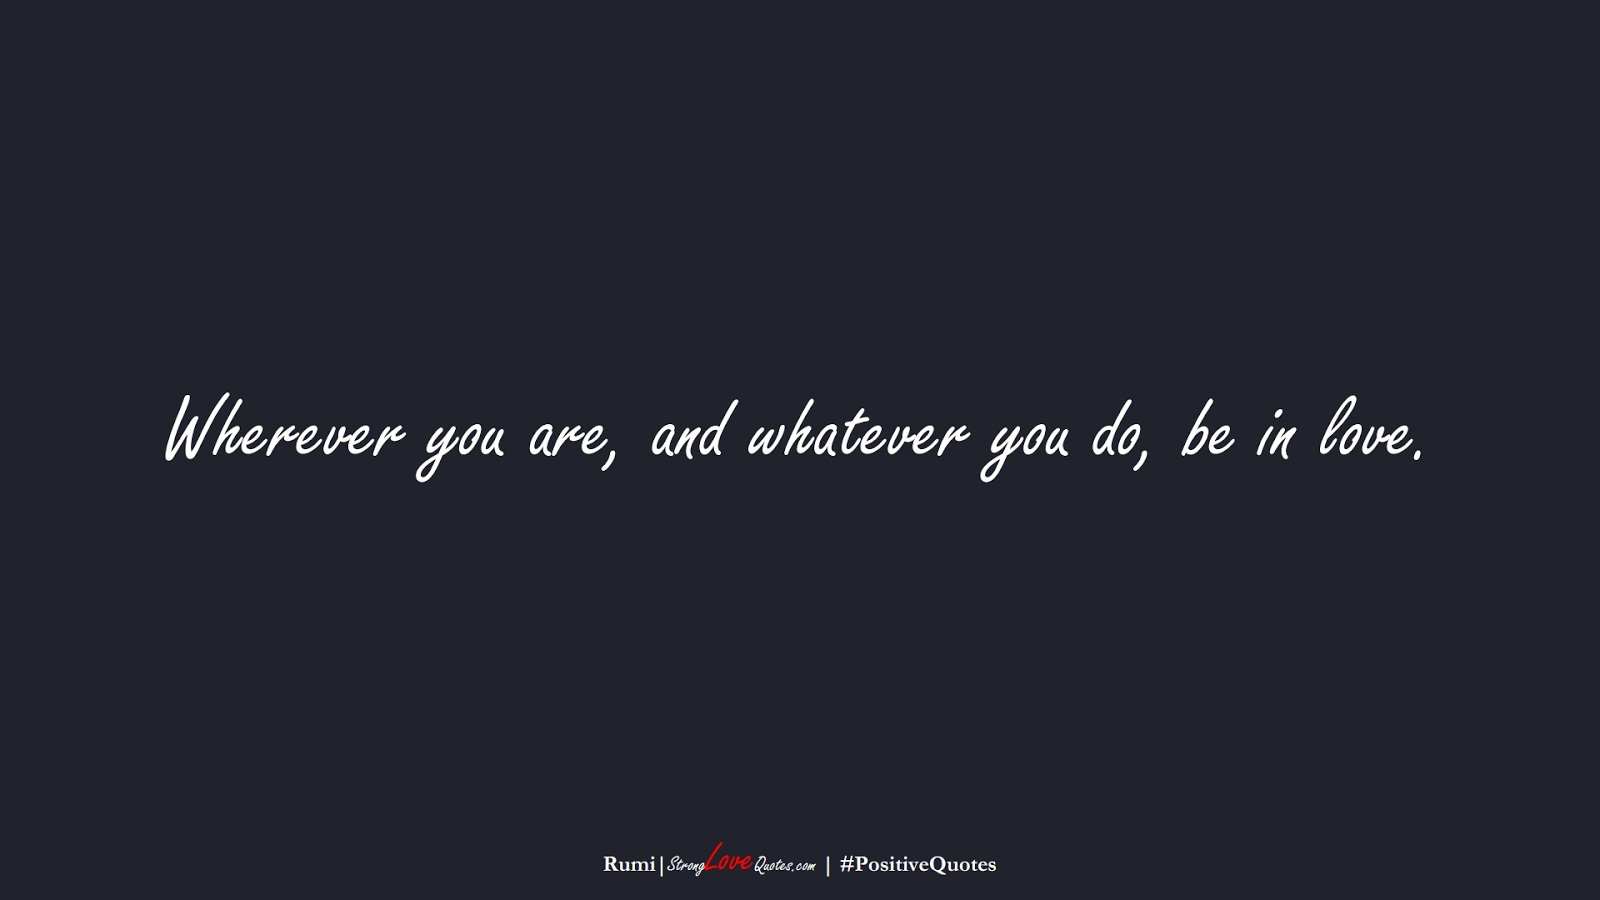 Wherever you are, and whatever you do, be in love. (Rumi);  #PositiveQuotes